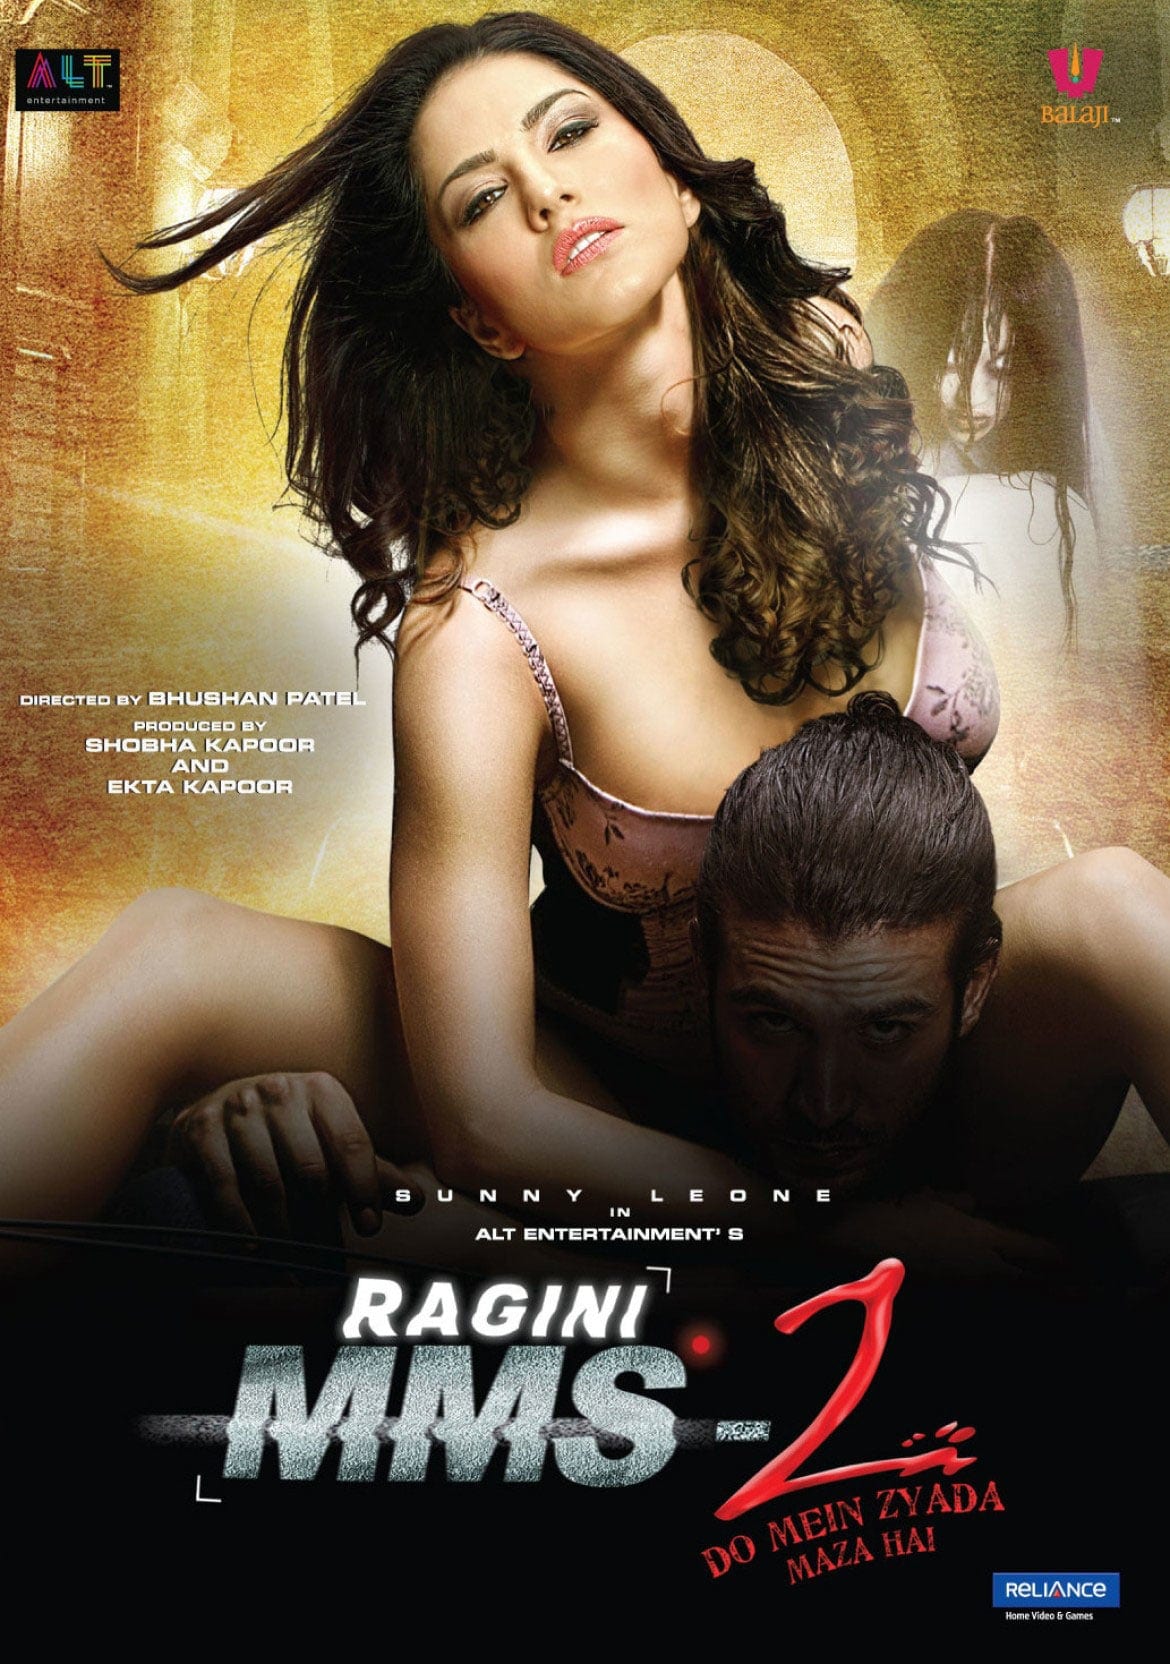 Poster for the movie "Ragini MMS 2"